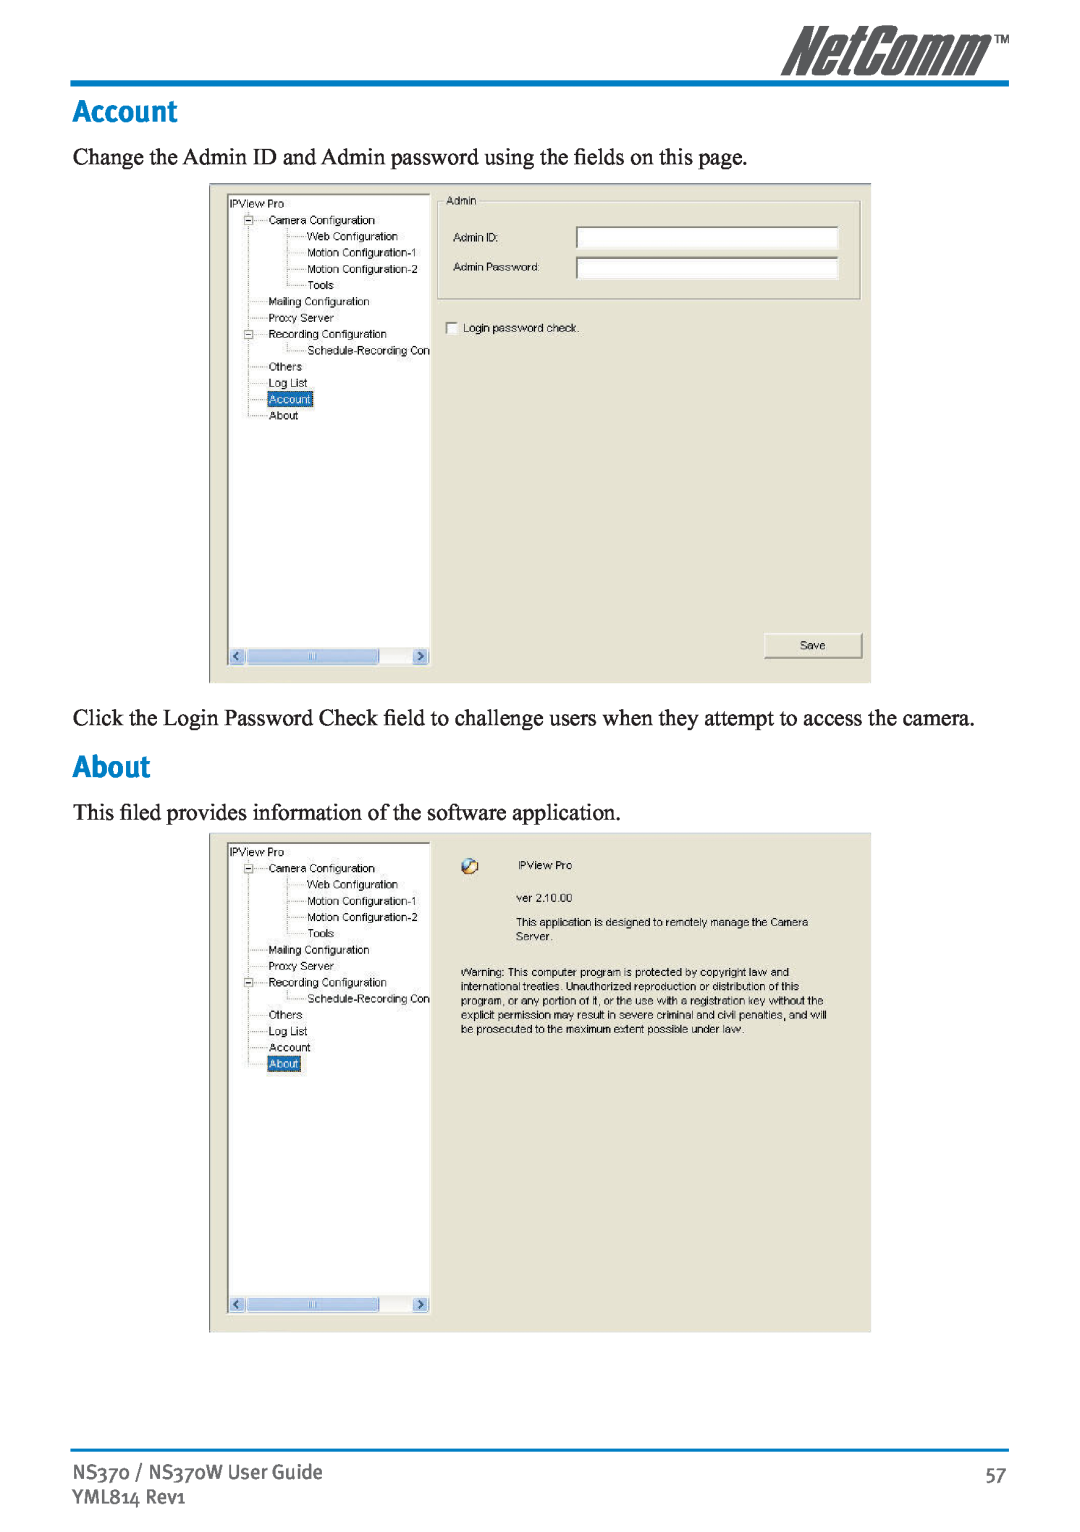 NetComm NS370W manual Account, About, Change the Admin ID and Admin password using the ﬁelds on this page, YML814 Rev1 